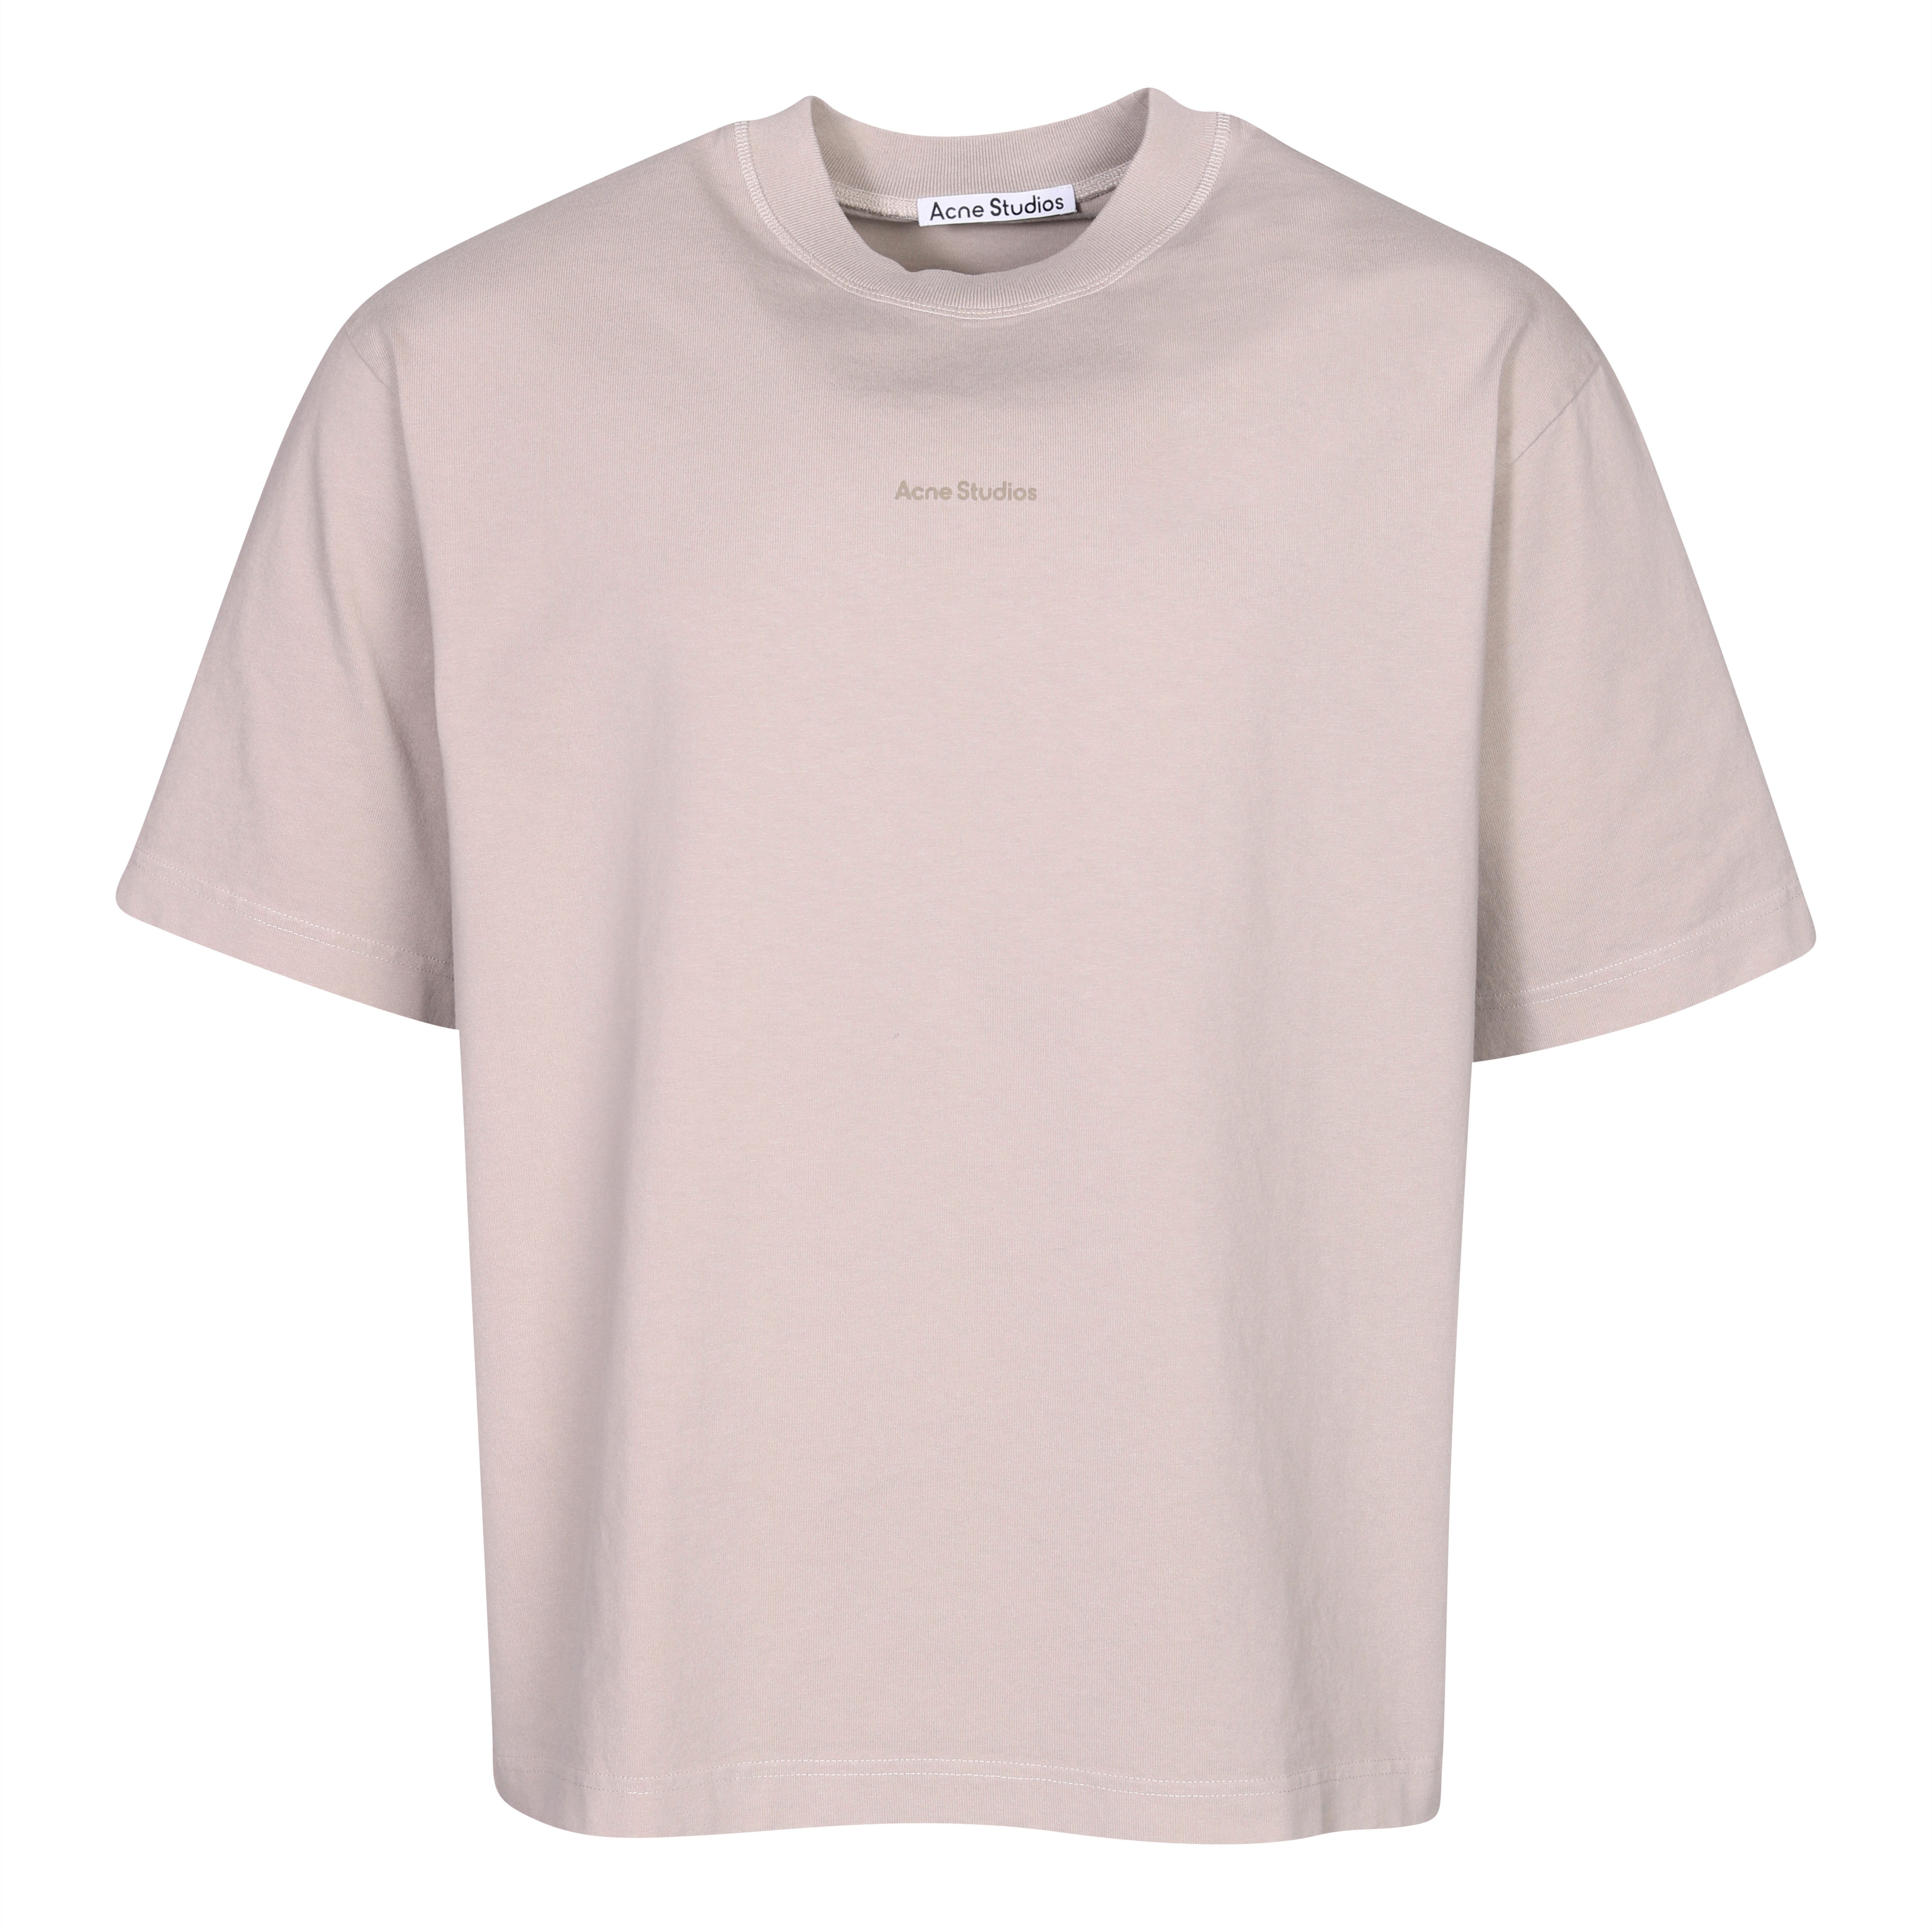 Acne Studios Stamp T-Shirt in Oyster Grey M